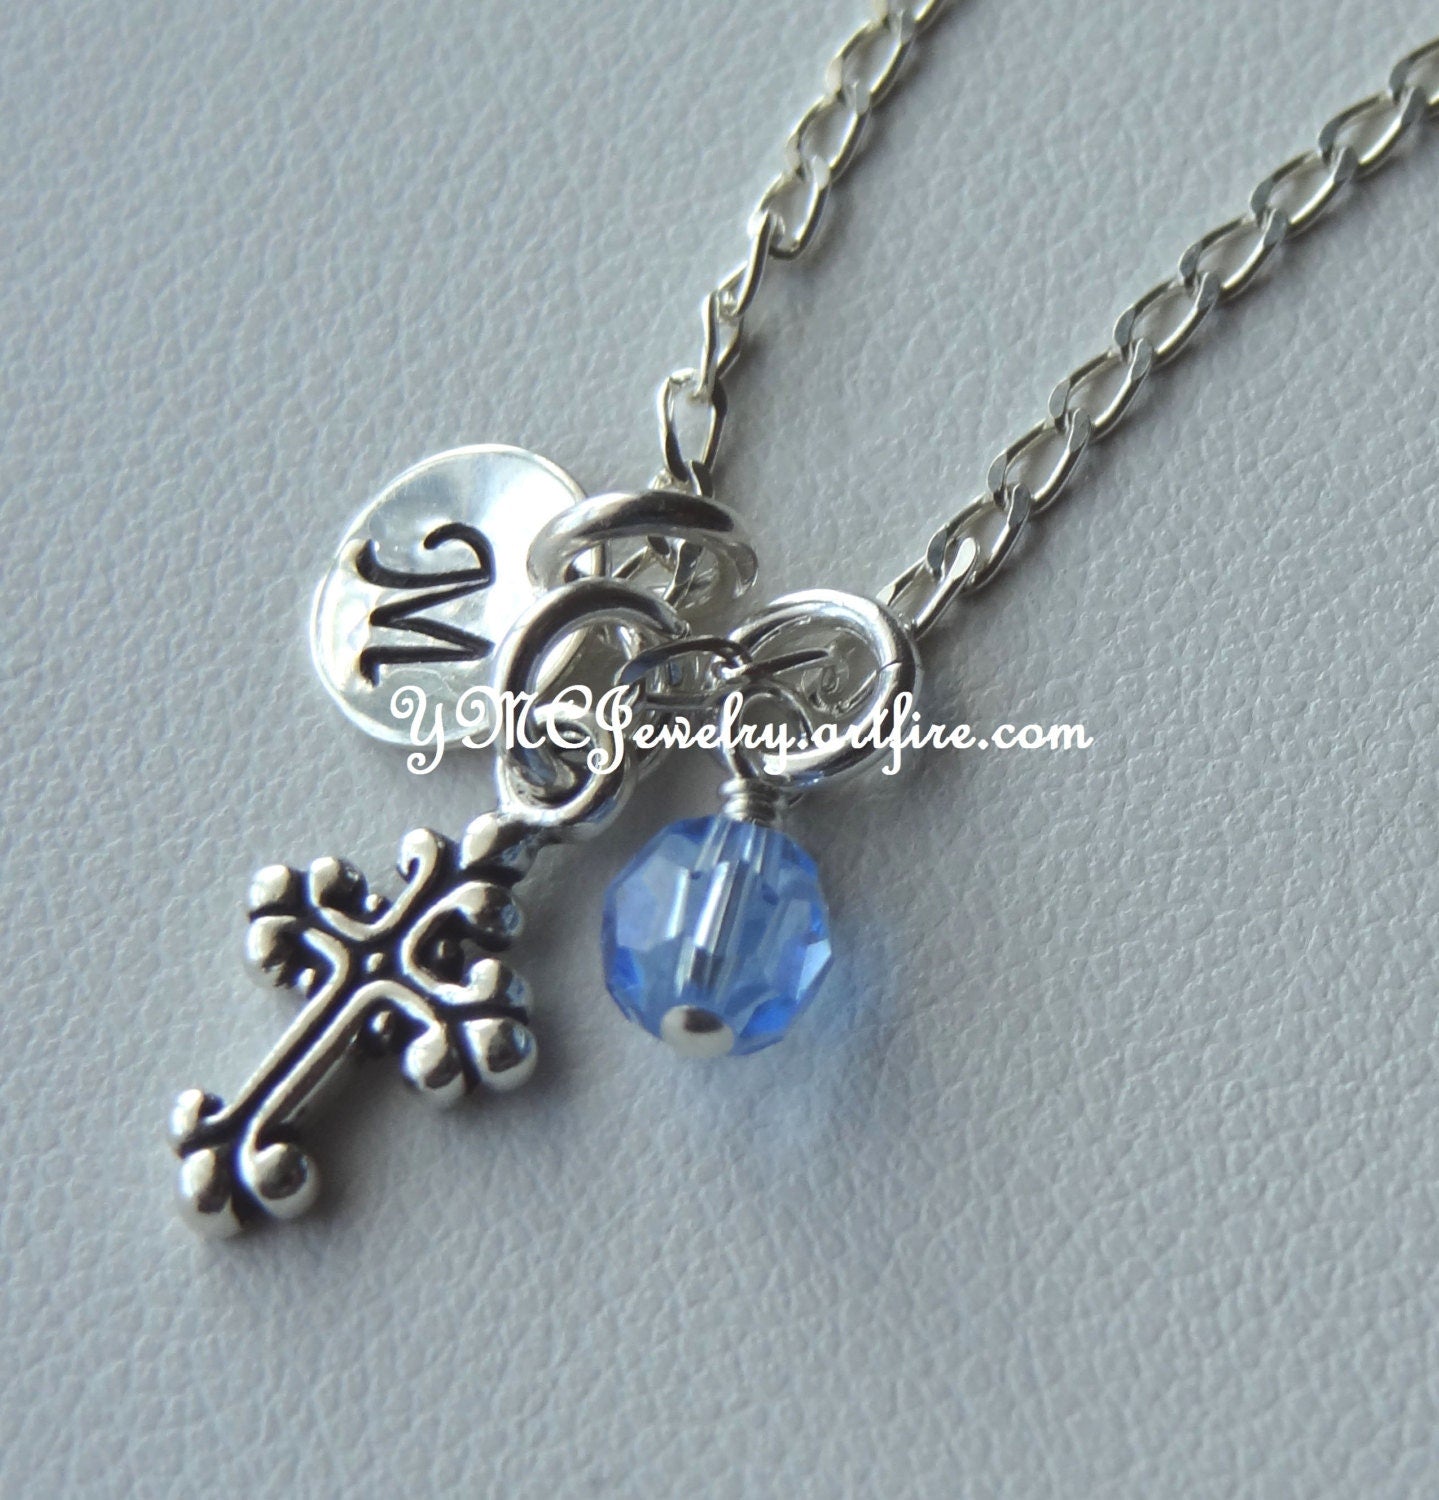 Personalized Silver Cross Initial Birthstone Necklace,Baptism Cross Necklace,Confirmation Cross Necklace,First Communion Cross Necklace